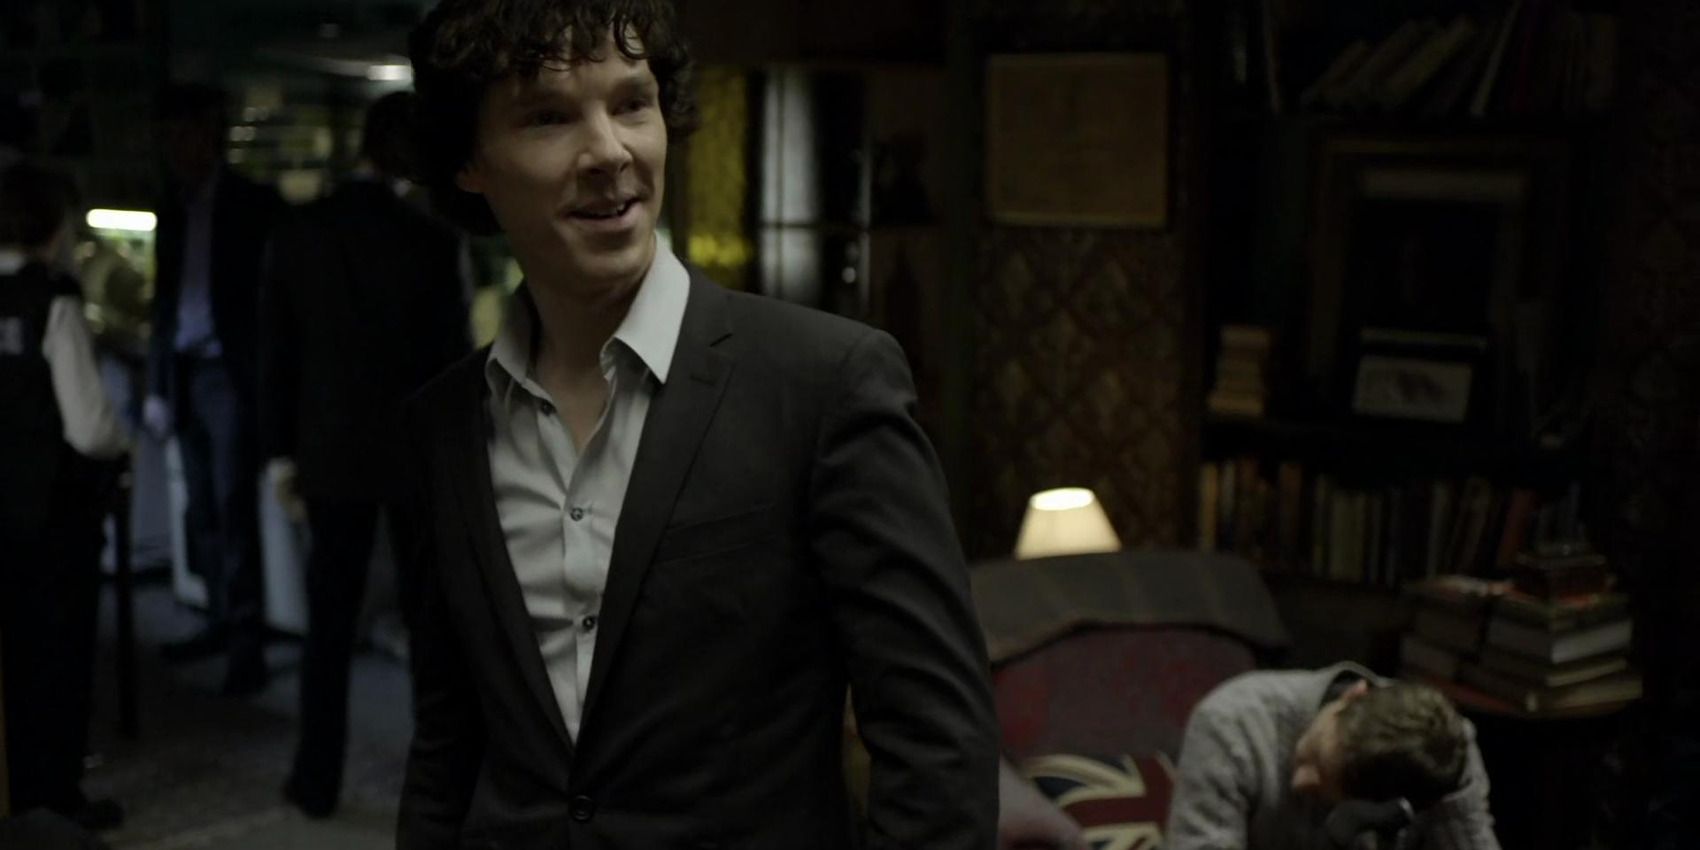 Benedict Cumberbatch is Sherlock Holmes in his crowded apartment